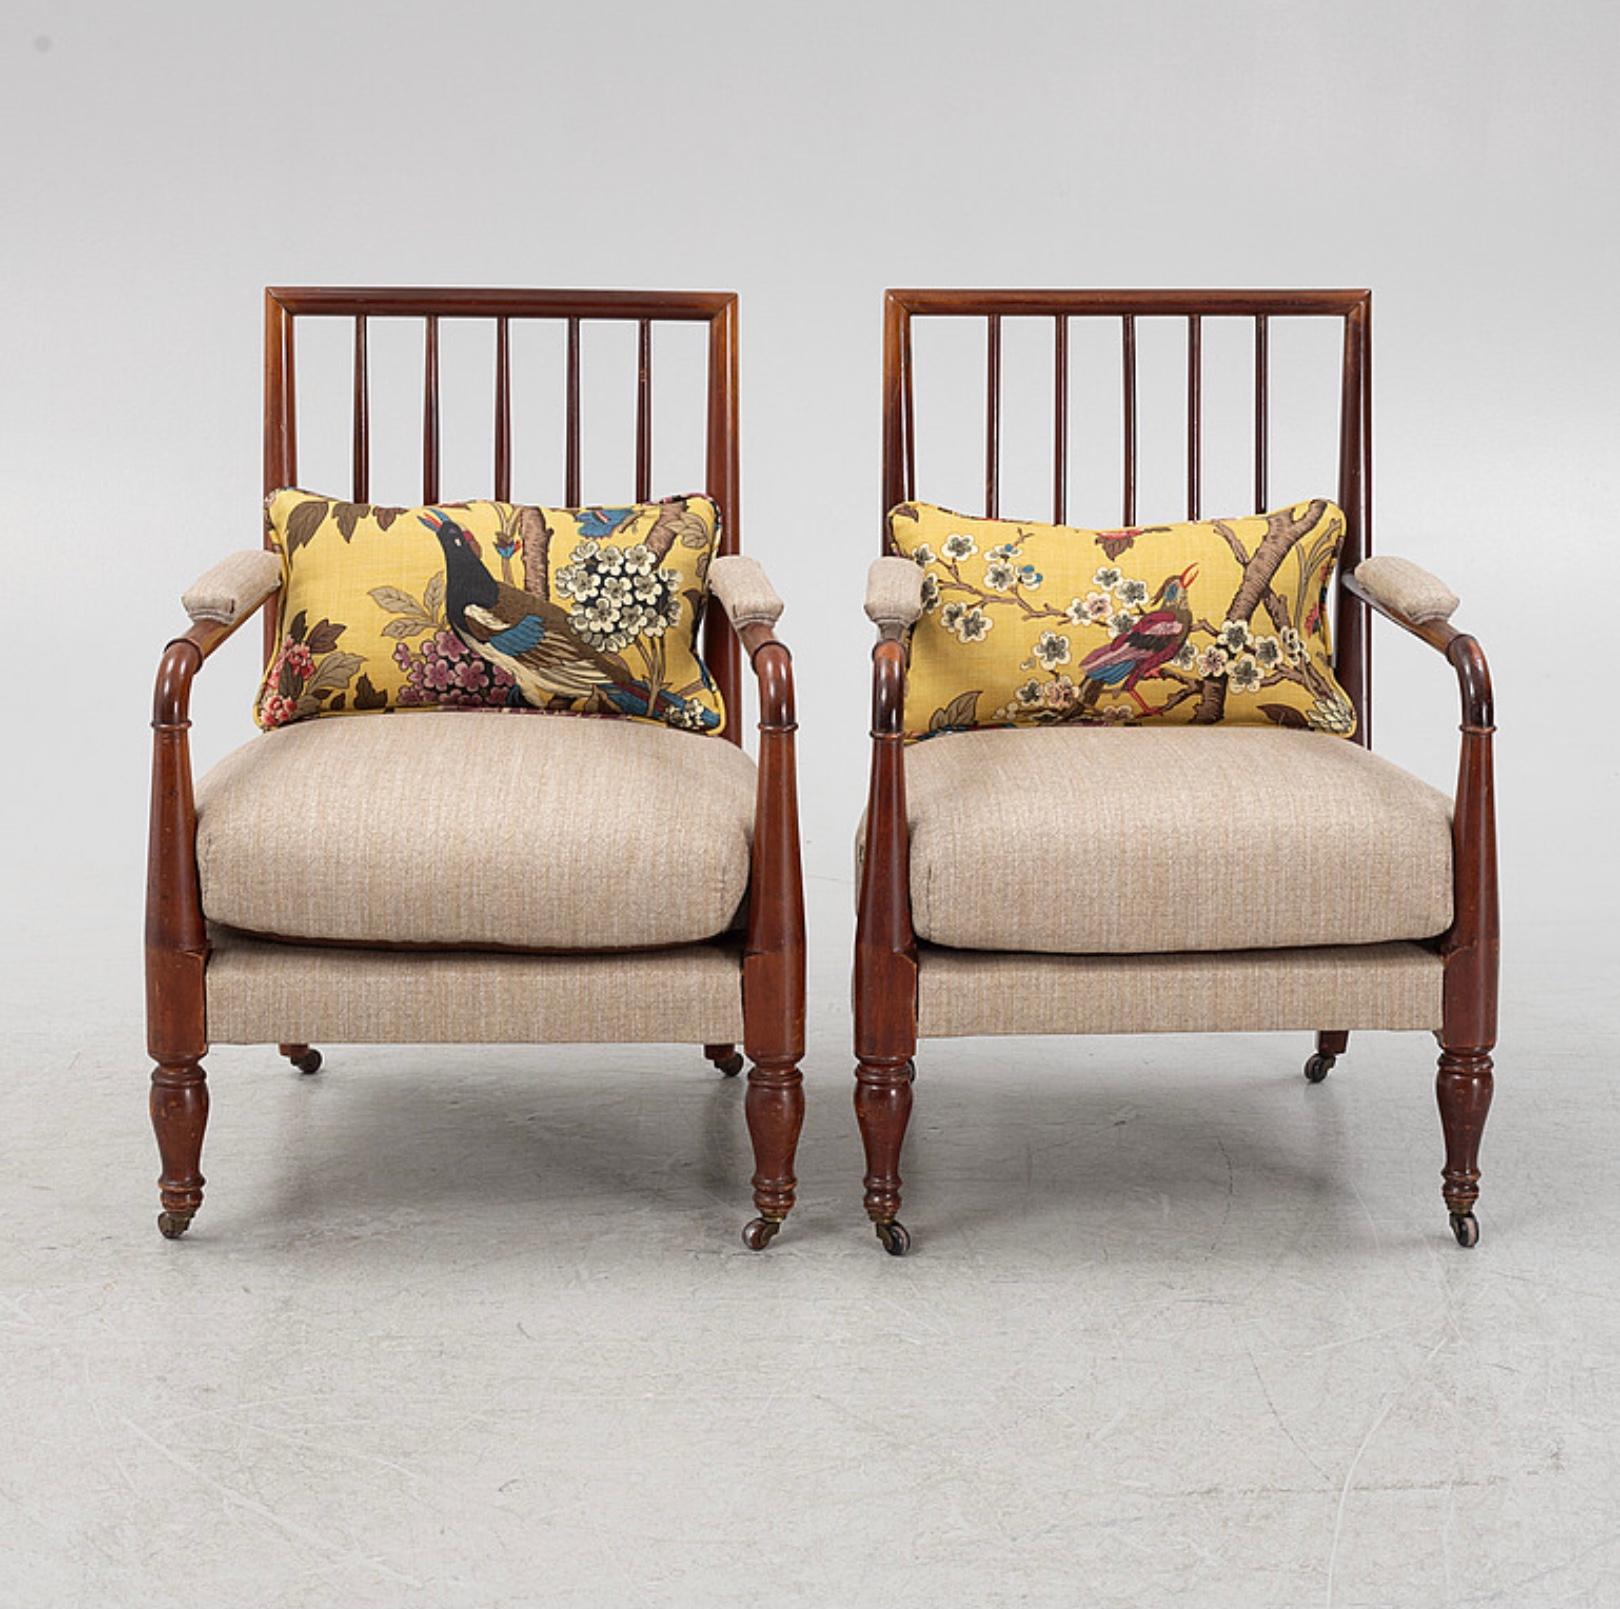 A lovely pair of Swedish spindle back open sided armchairs on turned legs with brass castors.
They are of neat proportions and upholstered in a neutral beige herringbone fabric with a fitted loose cushion seat.

These stylish chairs would work well